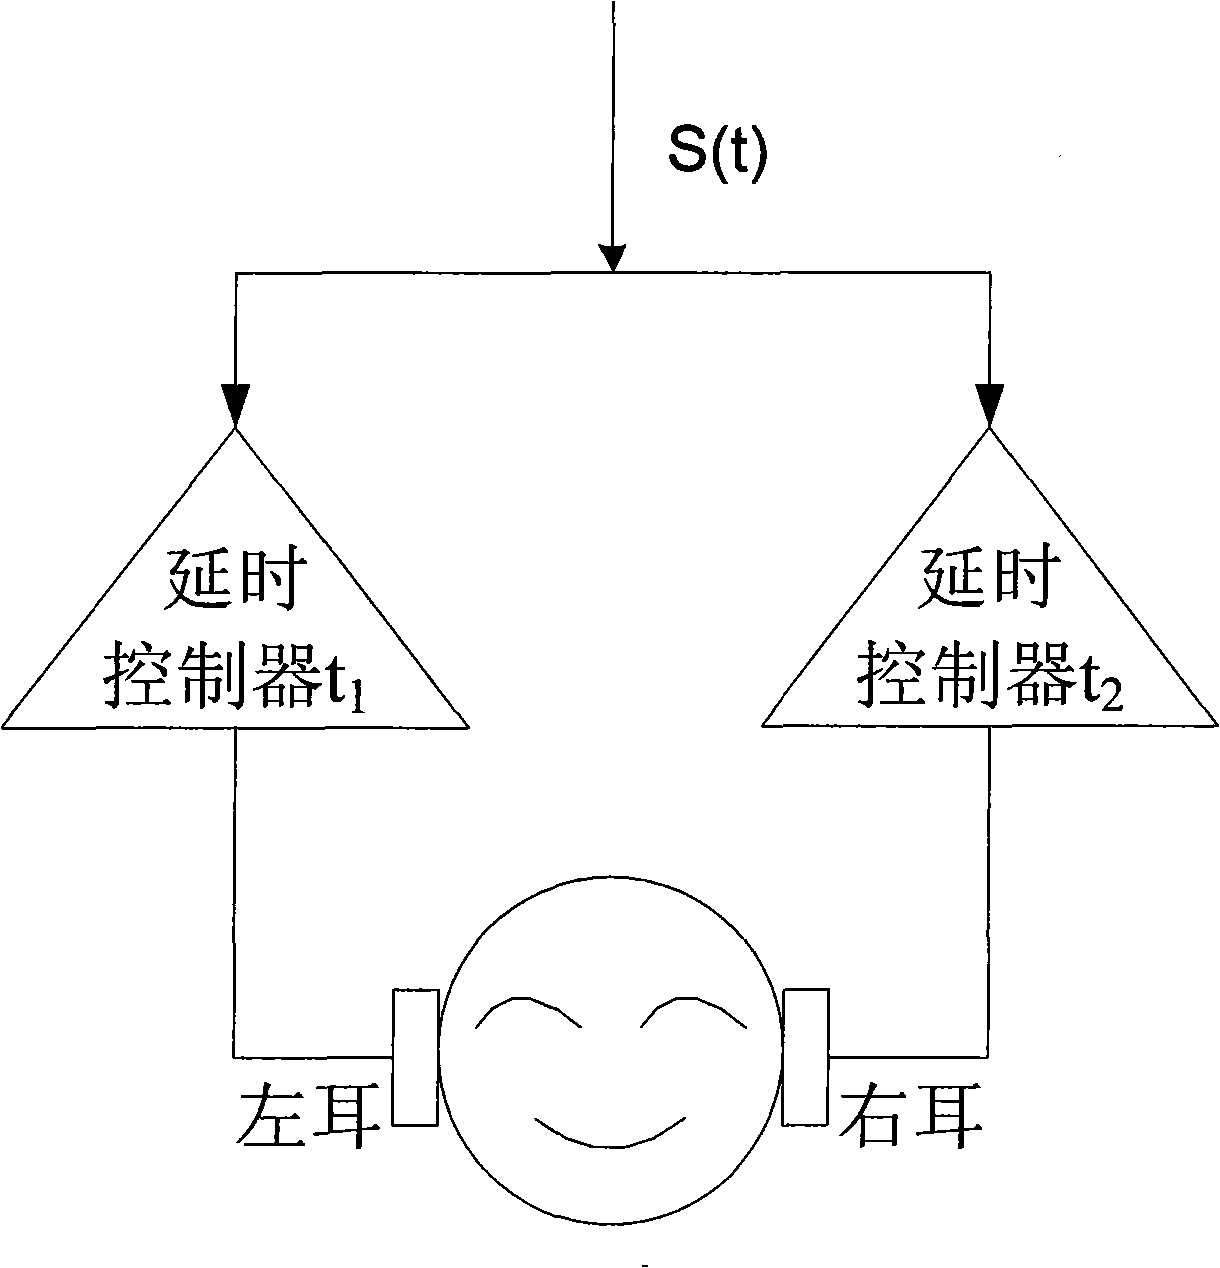 Method and device for measuring binaural sound time difference ILD critical apperceive characteristic